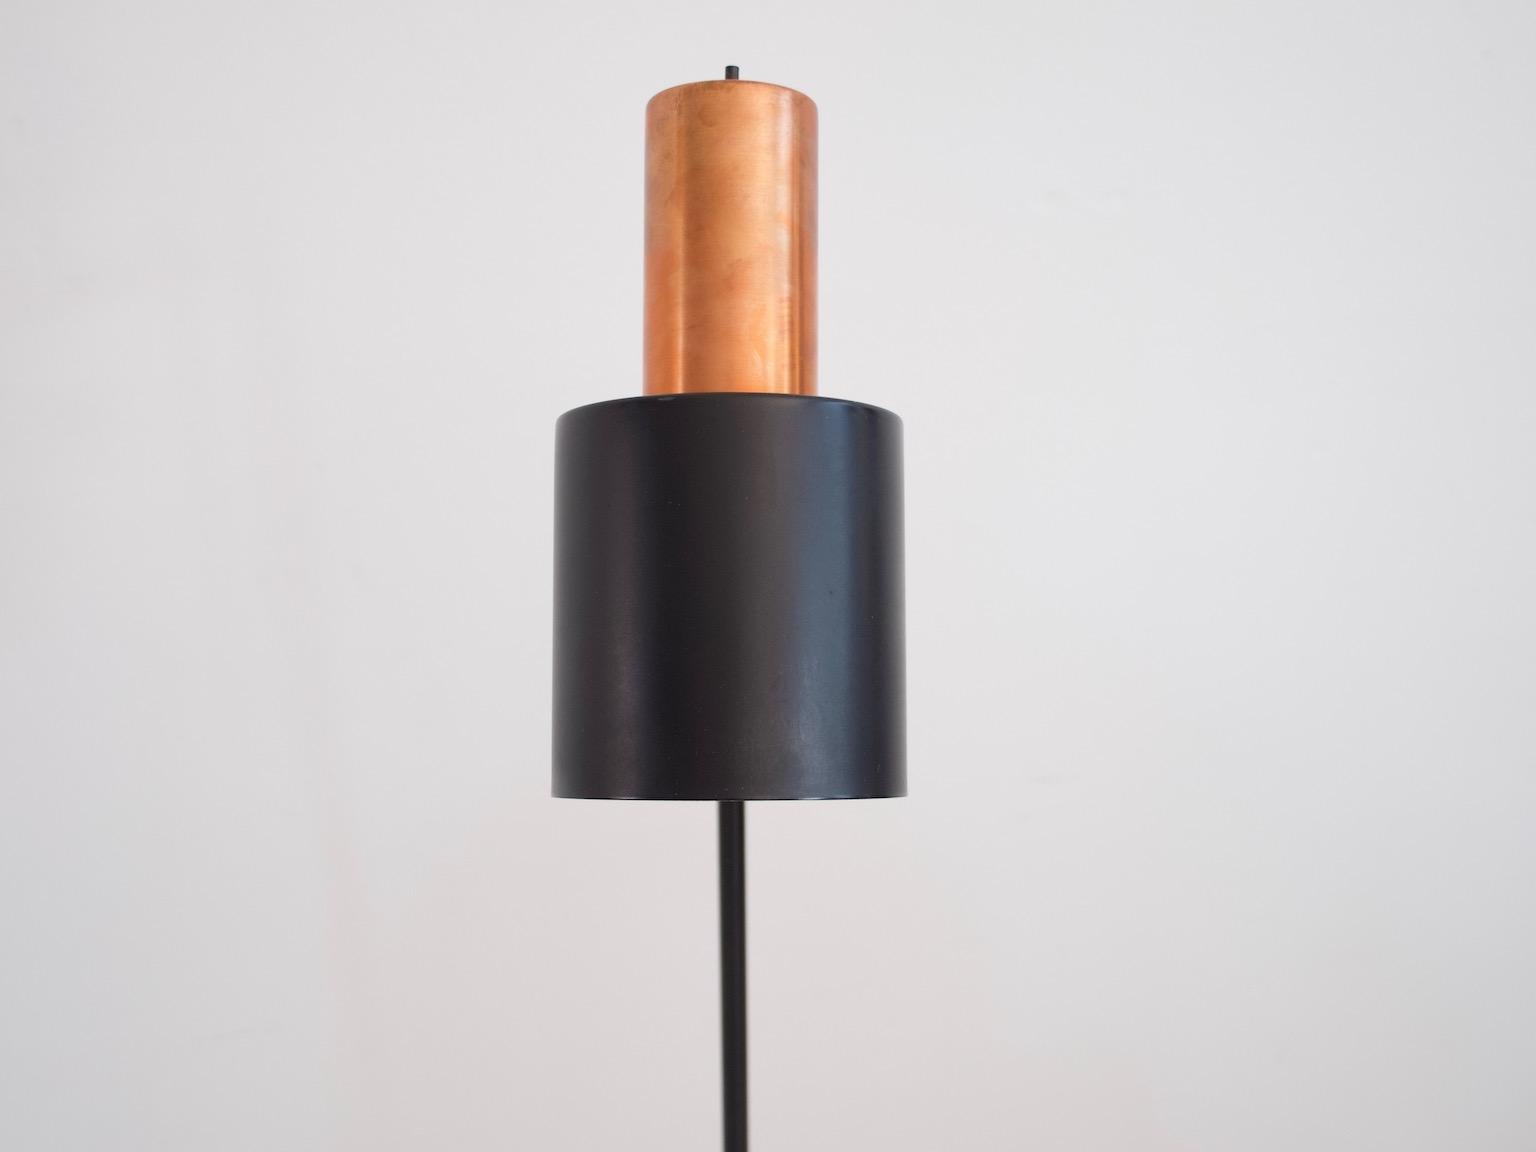 The 'Studio' floor lamp was designed by Jo Hammerborg for Fog and Mørup in 1963. It features copper and black painted metal shade and stand.
  